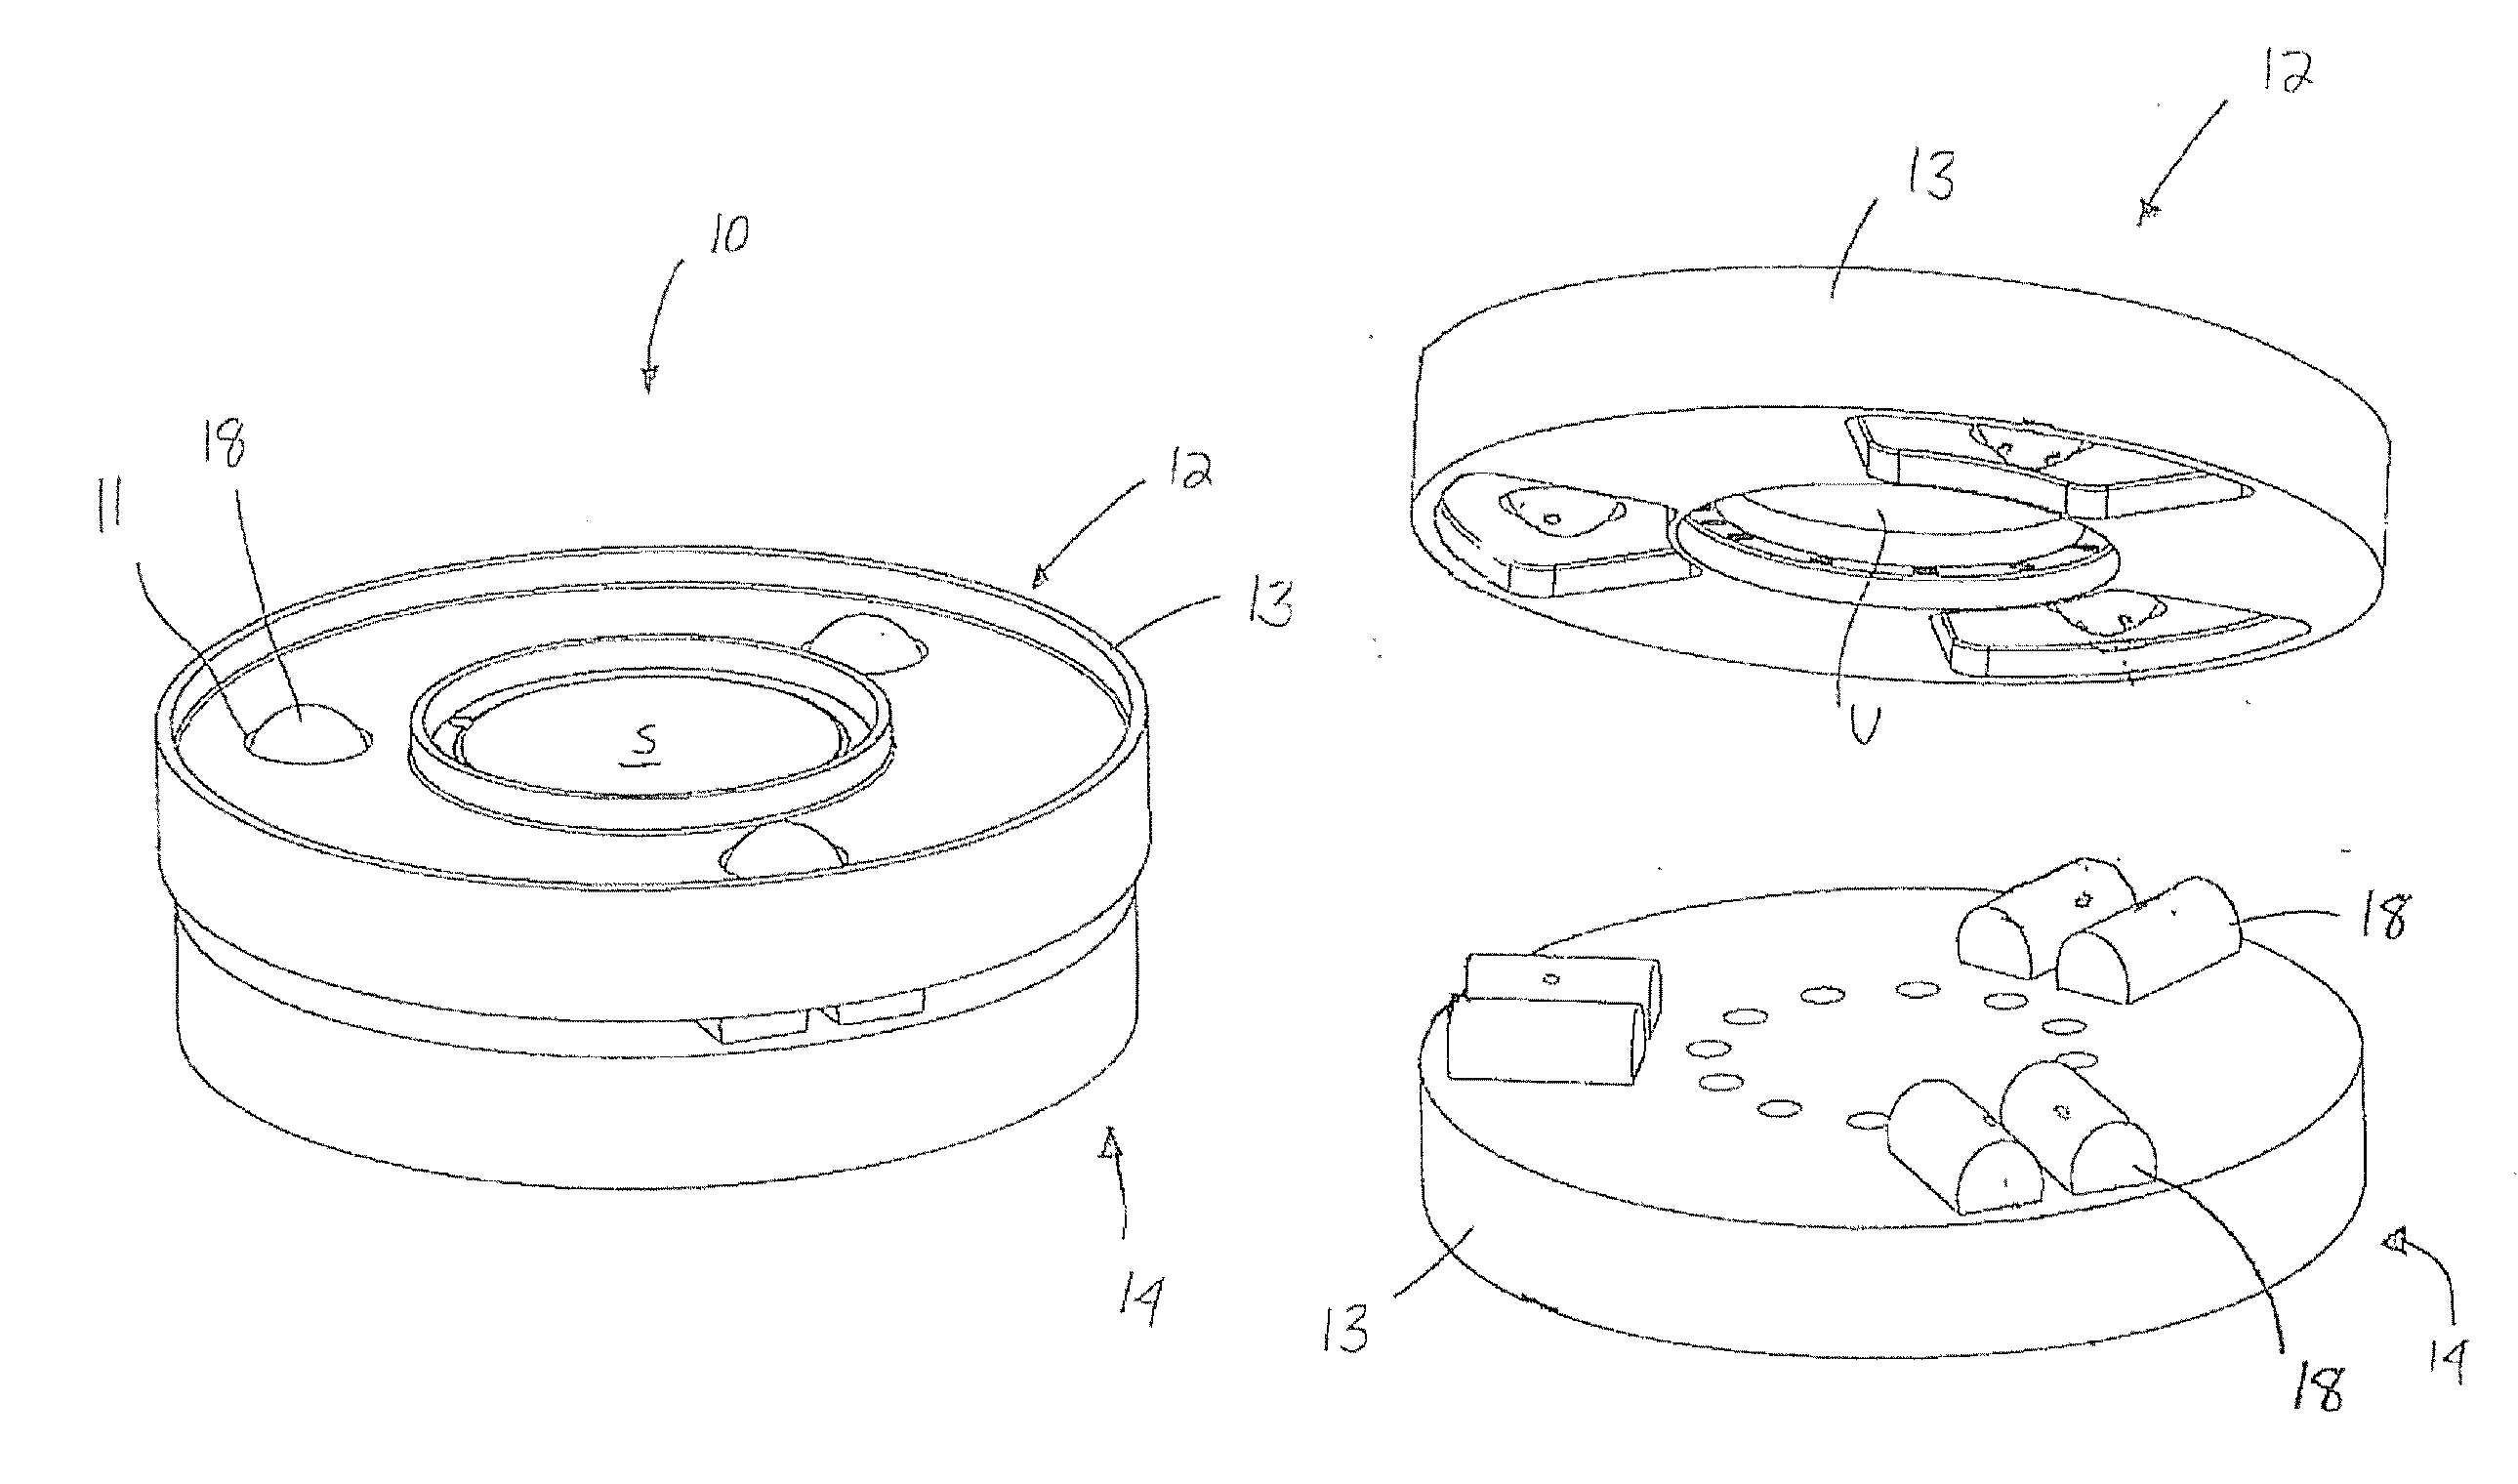 Apparatus and methods for forming kinematic coupling components